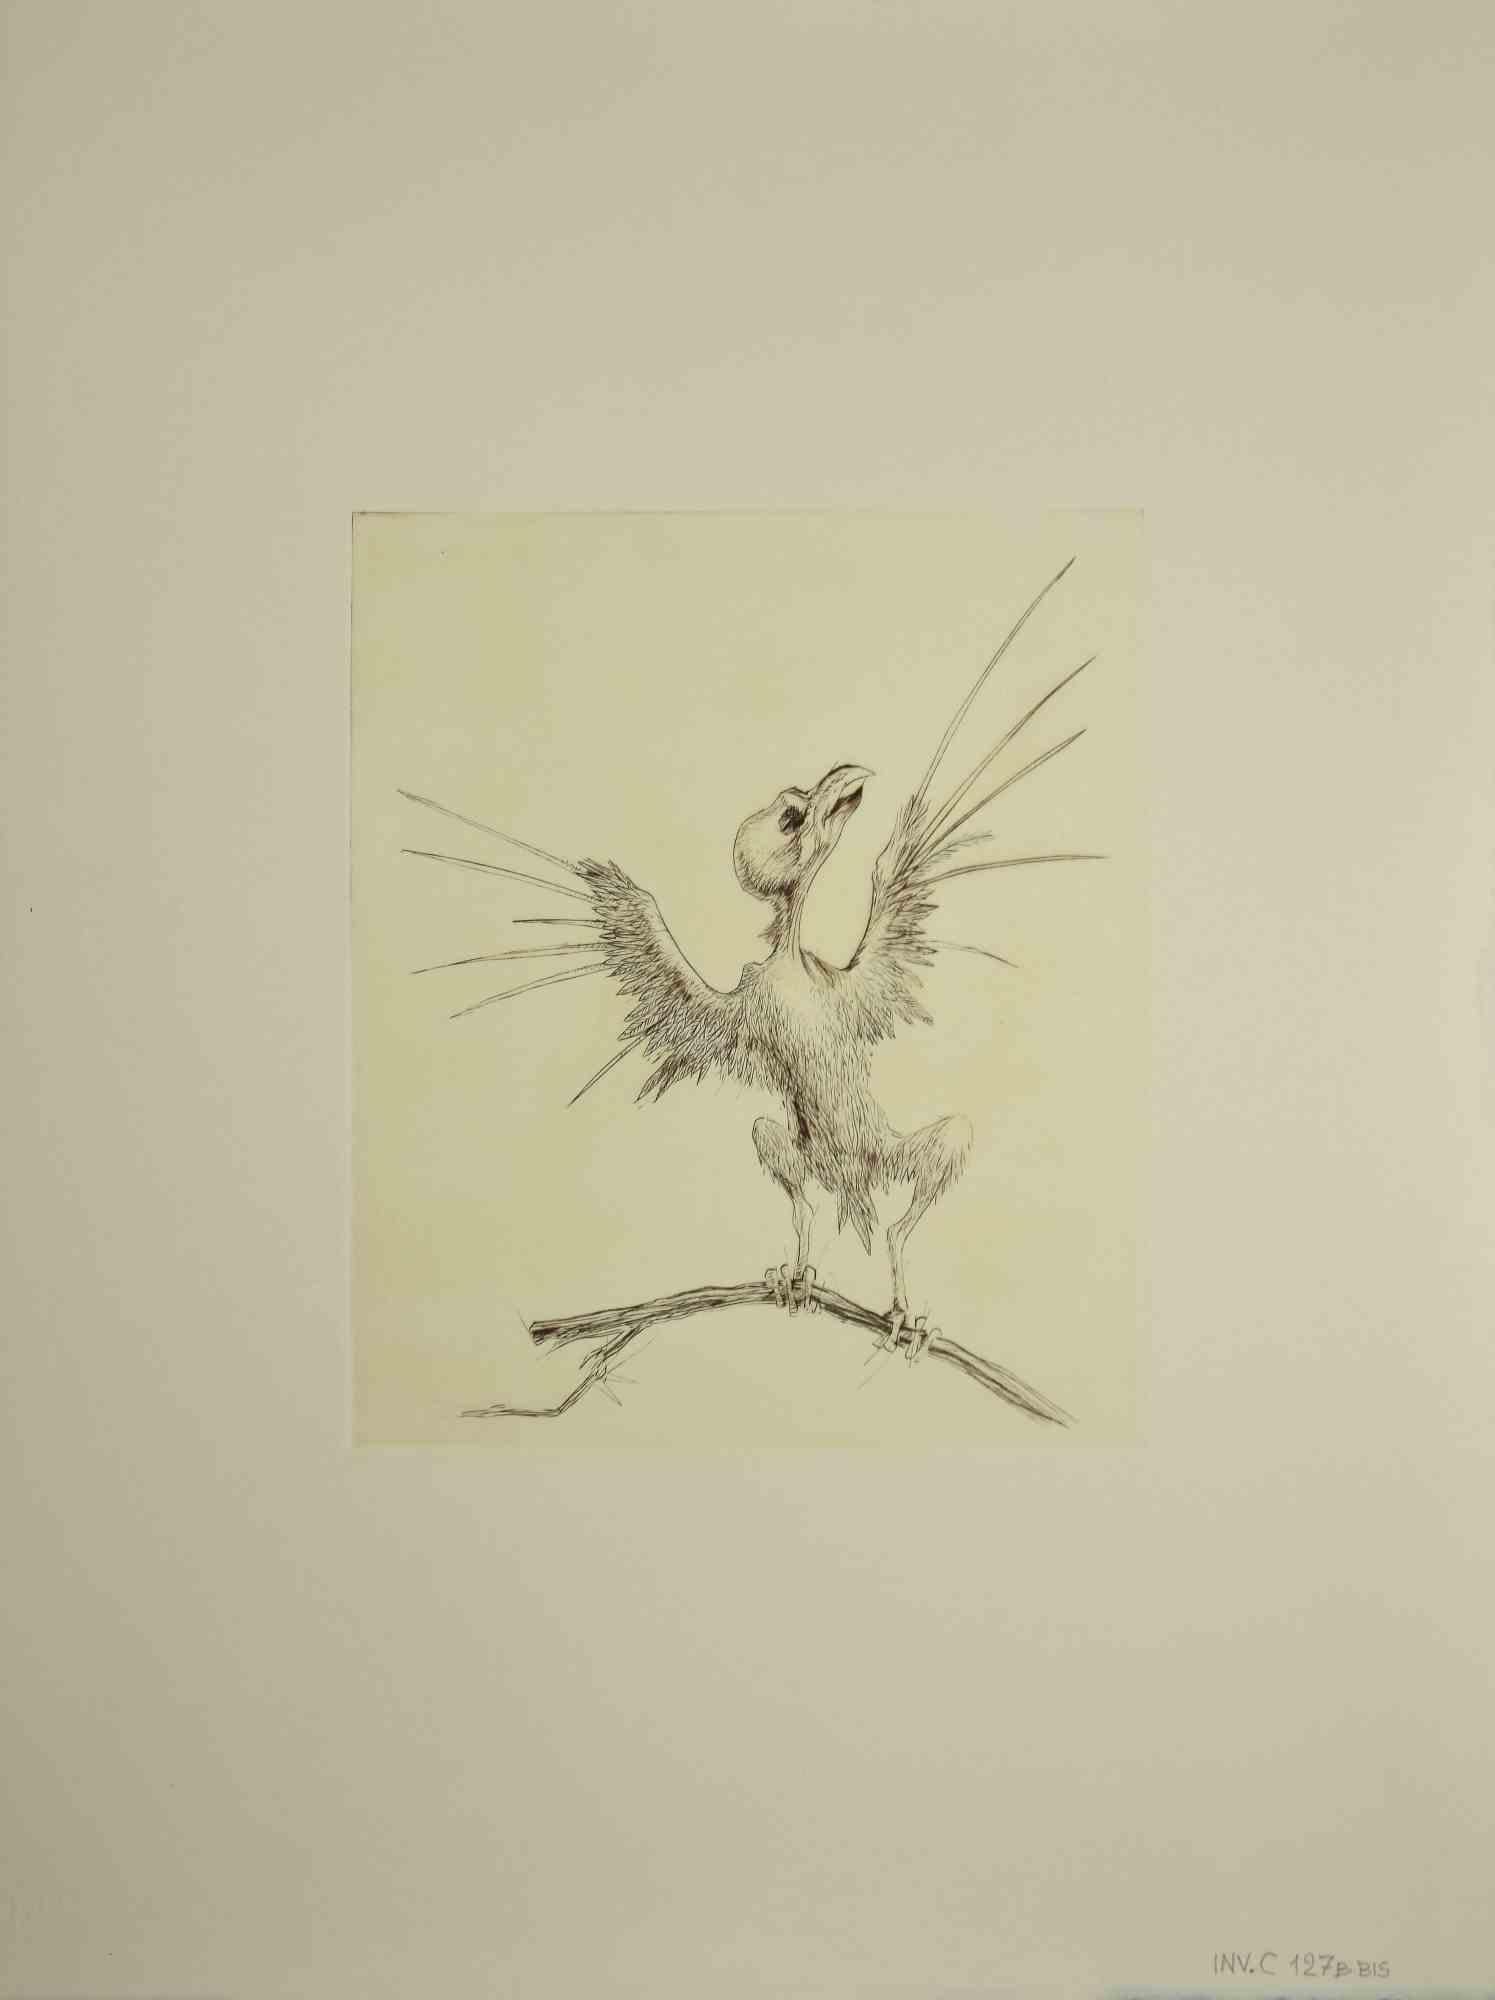 Bird is an original Contemporary artwork realized  in 1970  by the italian Contemporary artist  Leo Guida  (1992 - 2017).

Original black and white etching on ivory-colored cardboard.

Not signed. 

In this artwork is represented a bird. INV.C 127 B